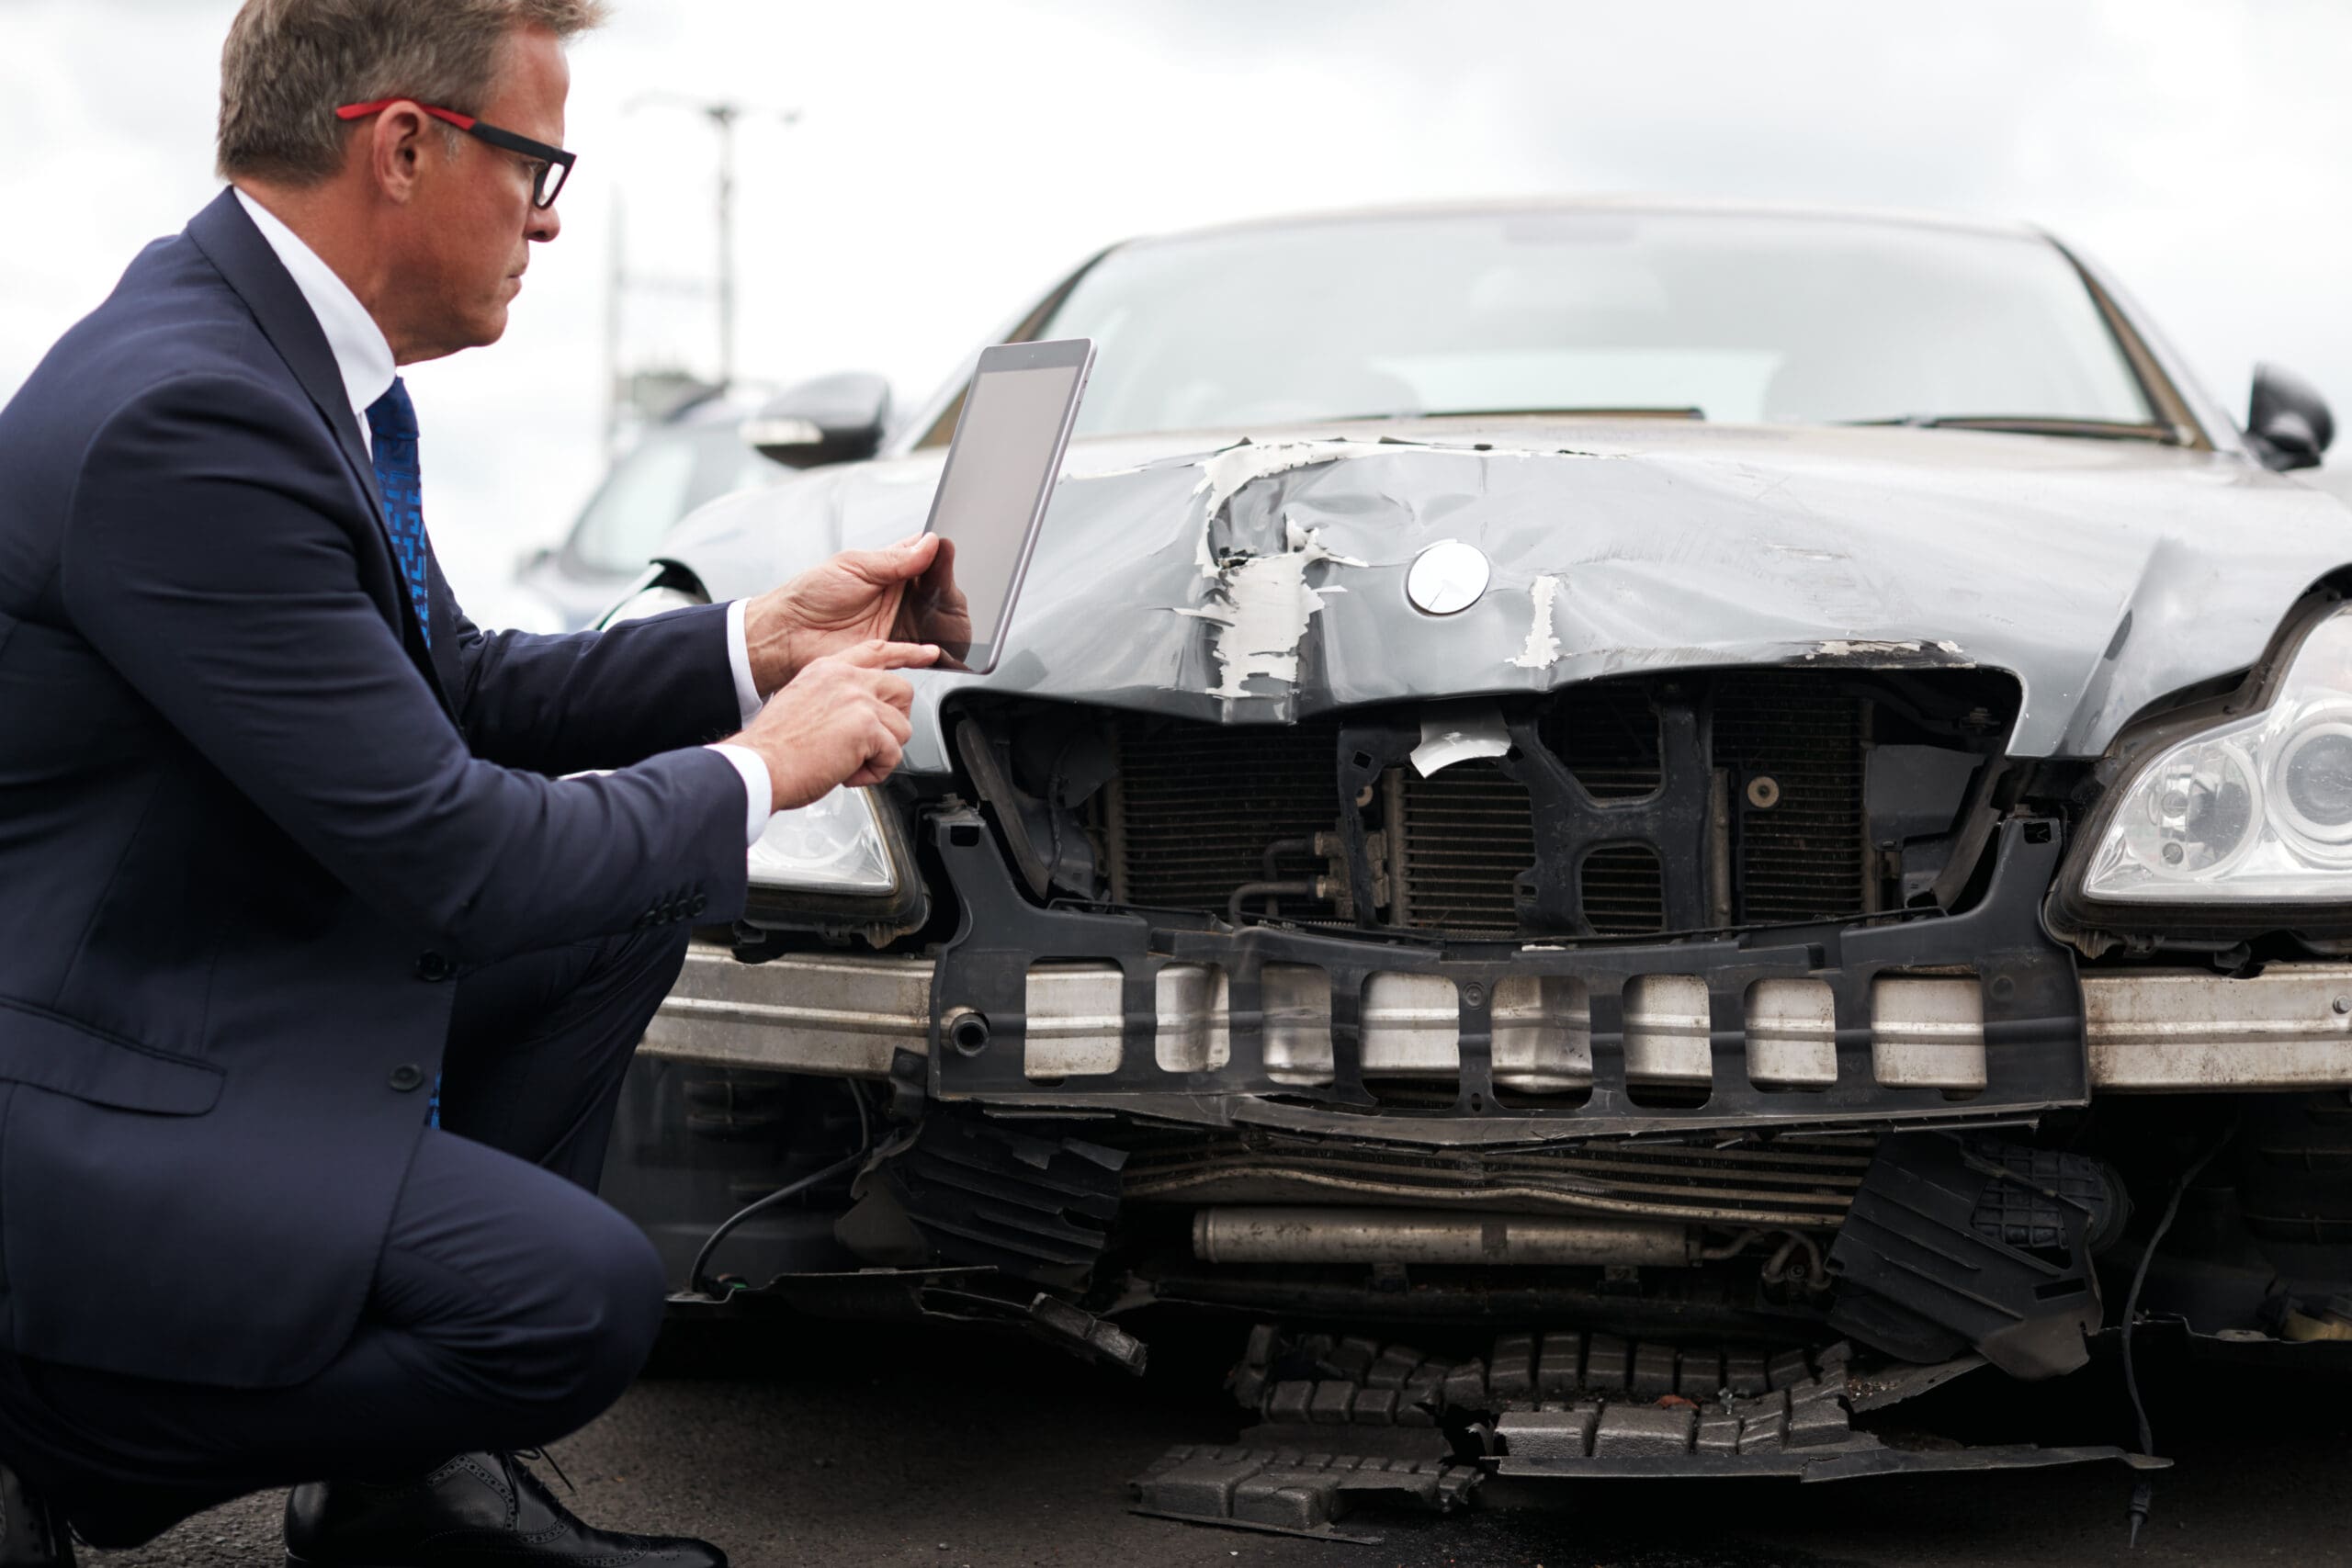 Seven Explanations On Why Accident Lawsuits Is Important